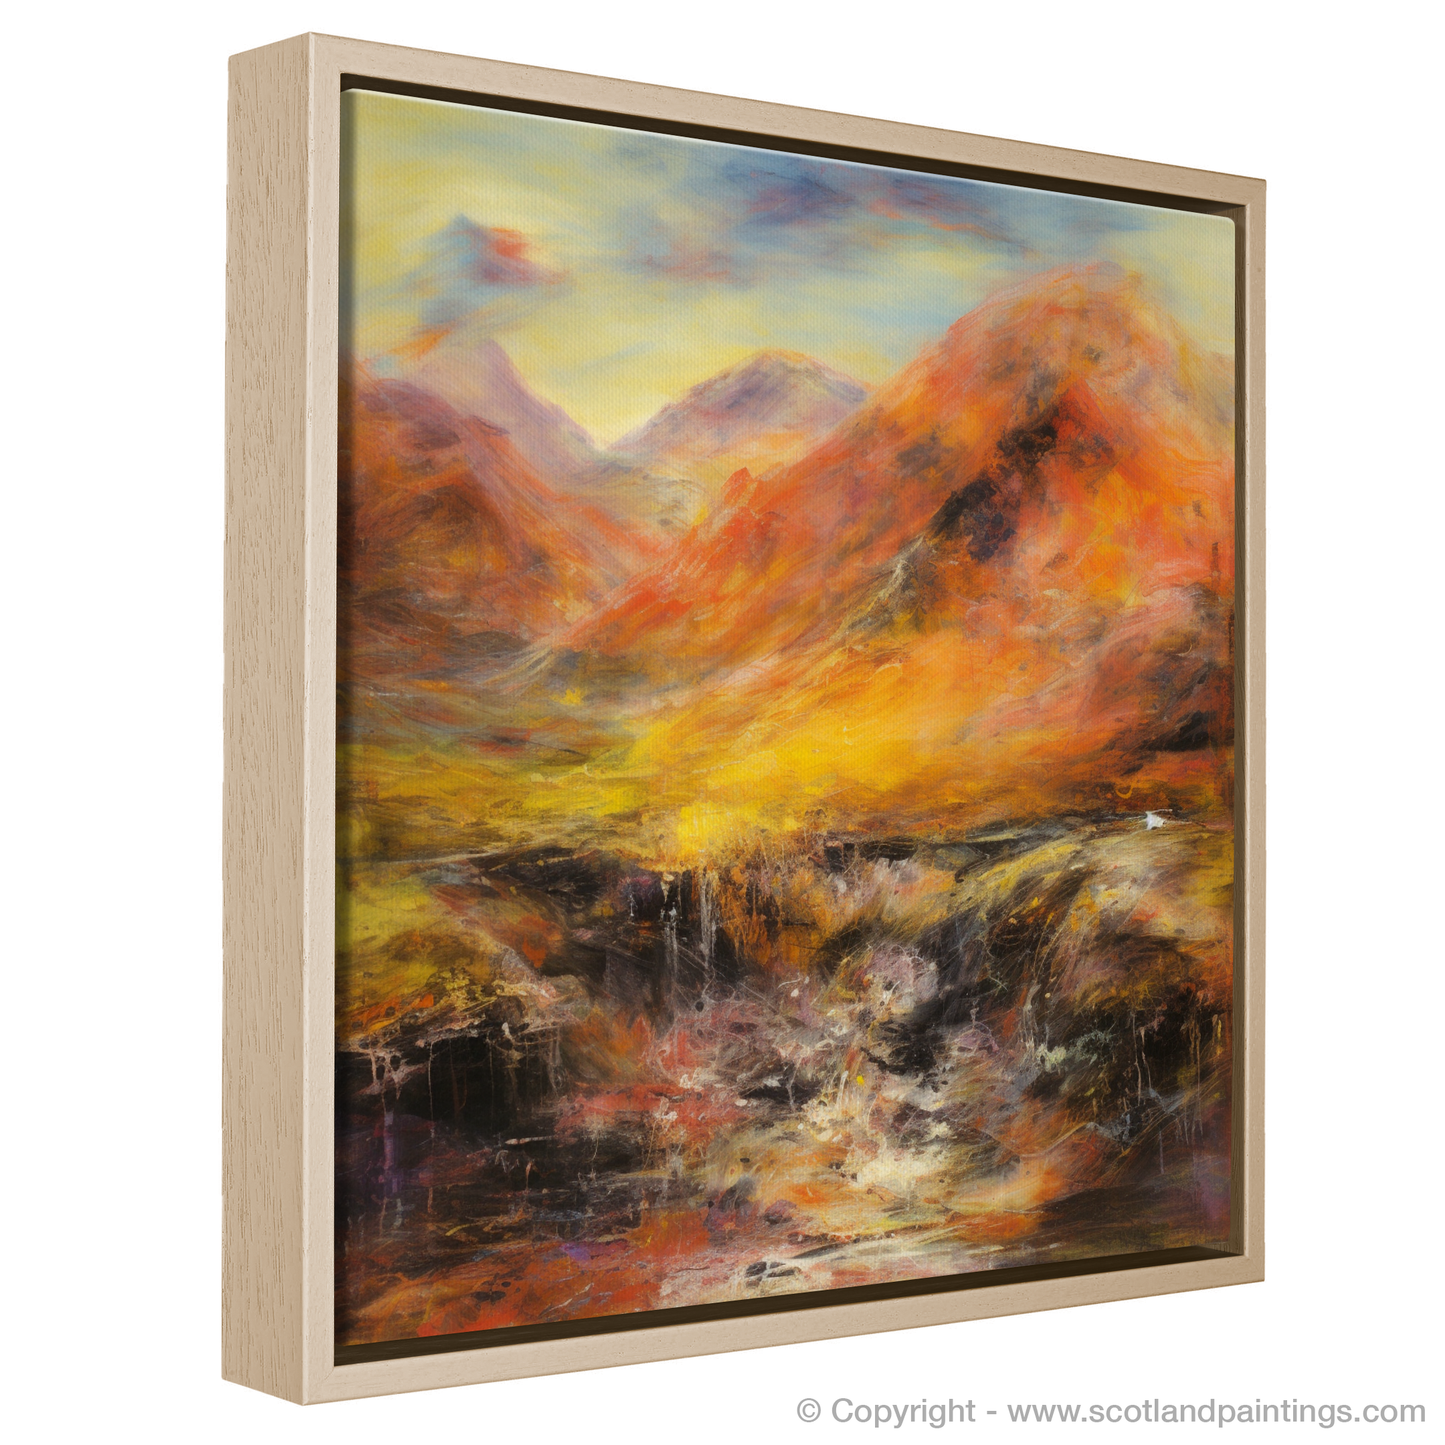 Painting and Art Print of Walker crossing River Coe in Glencoe entitled "Walker Crossing River Coe: An Abstract Expressionist Journey through Glencoe".